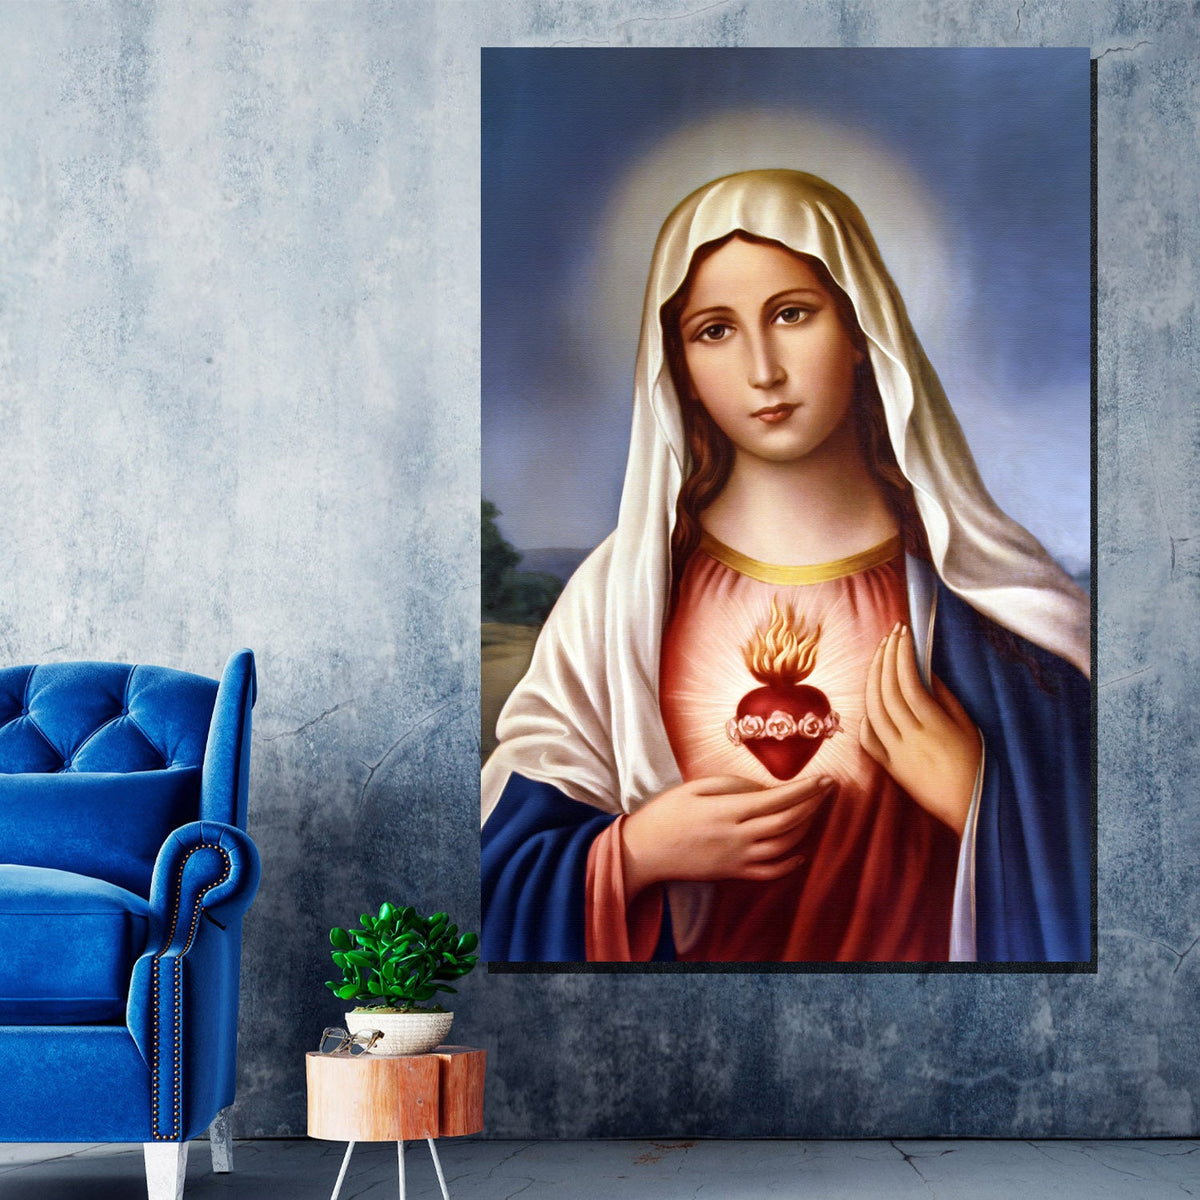 https://cdn.shopify.com/s/files/1/0387/9986/8044/products/OurLadyoftheSacredHeartCanvasArtprintStretched-3.jpg